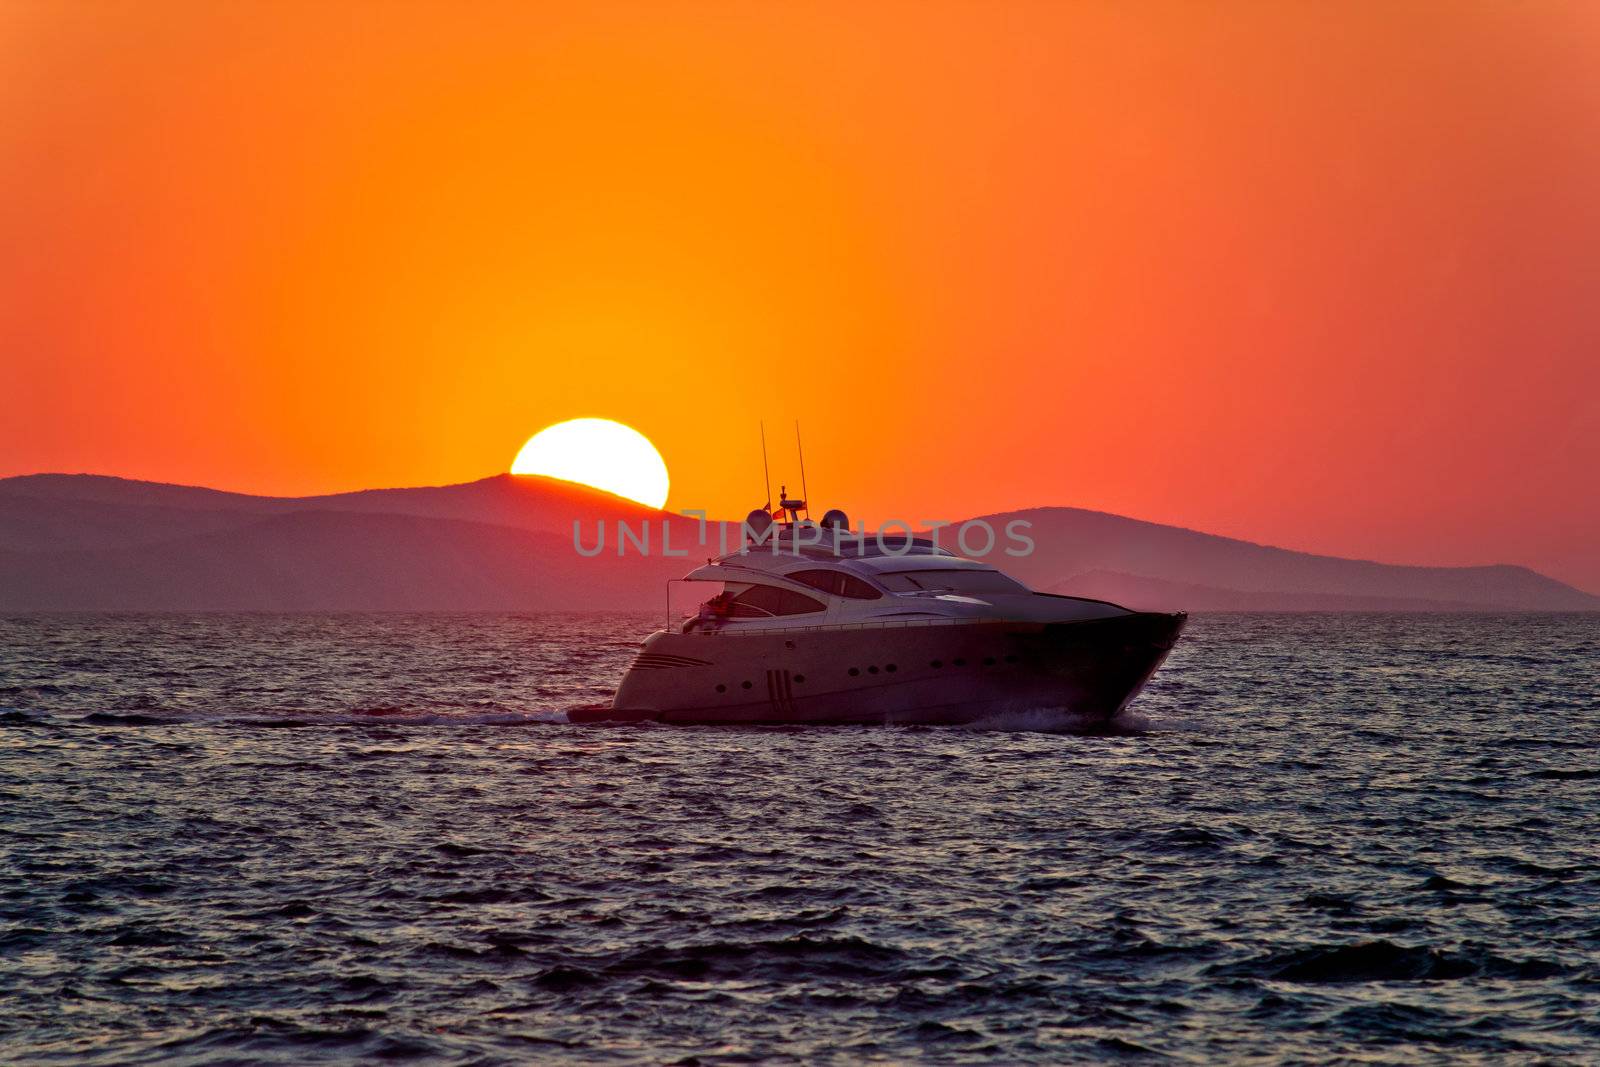 Yacht on sea with epic sunset by xbrchx